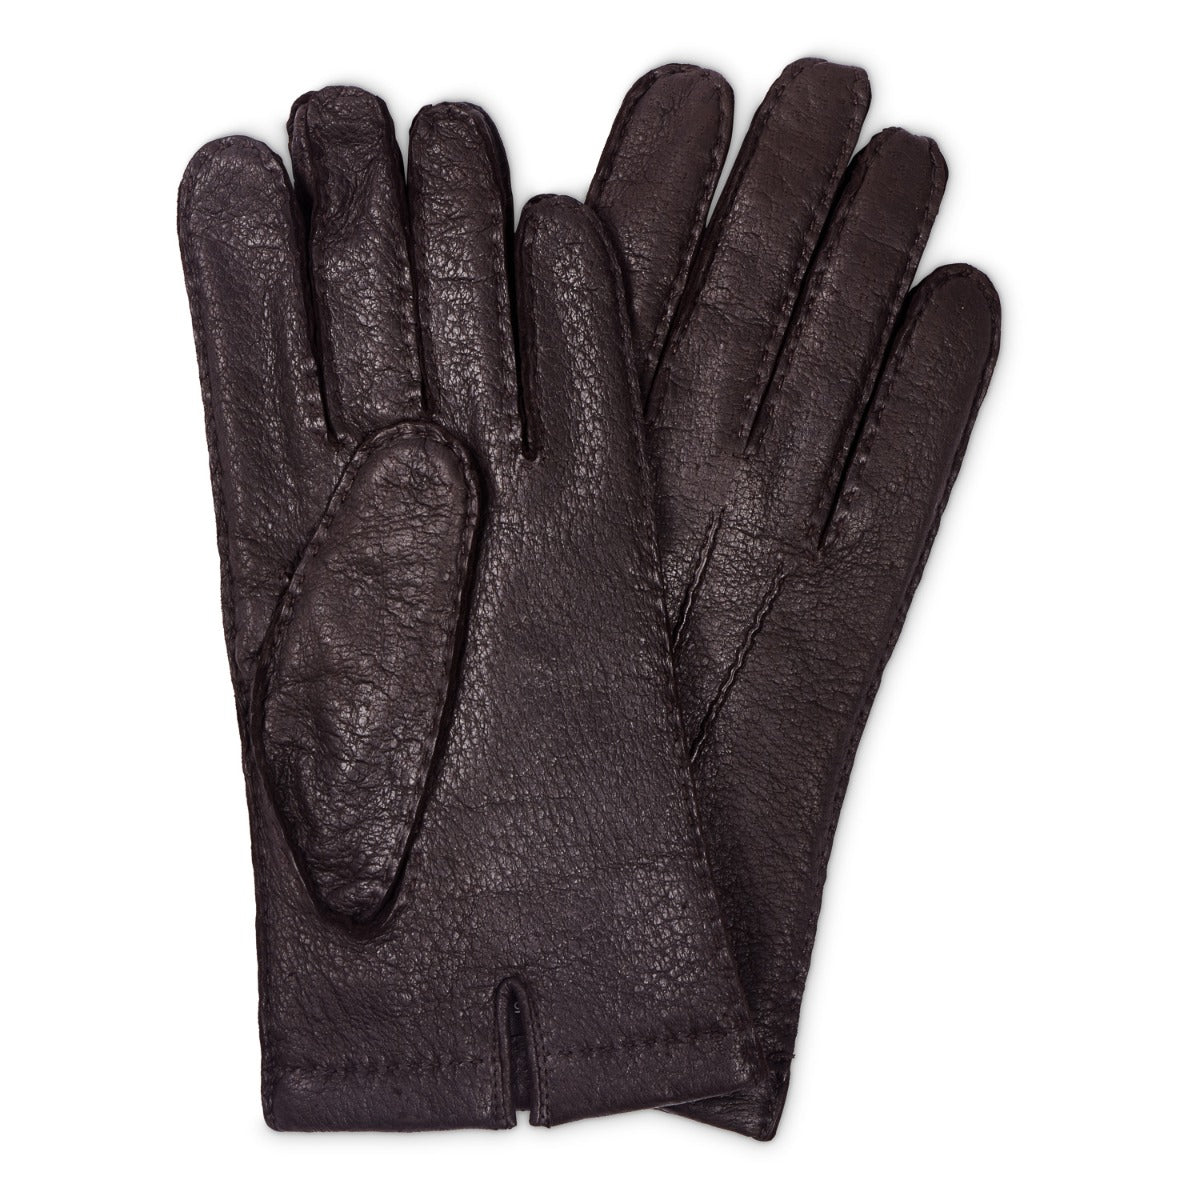 Sovereign Grade Dark Brown Peccary Leather Gloves, Cashmere Lined